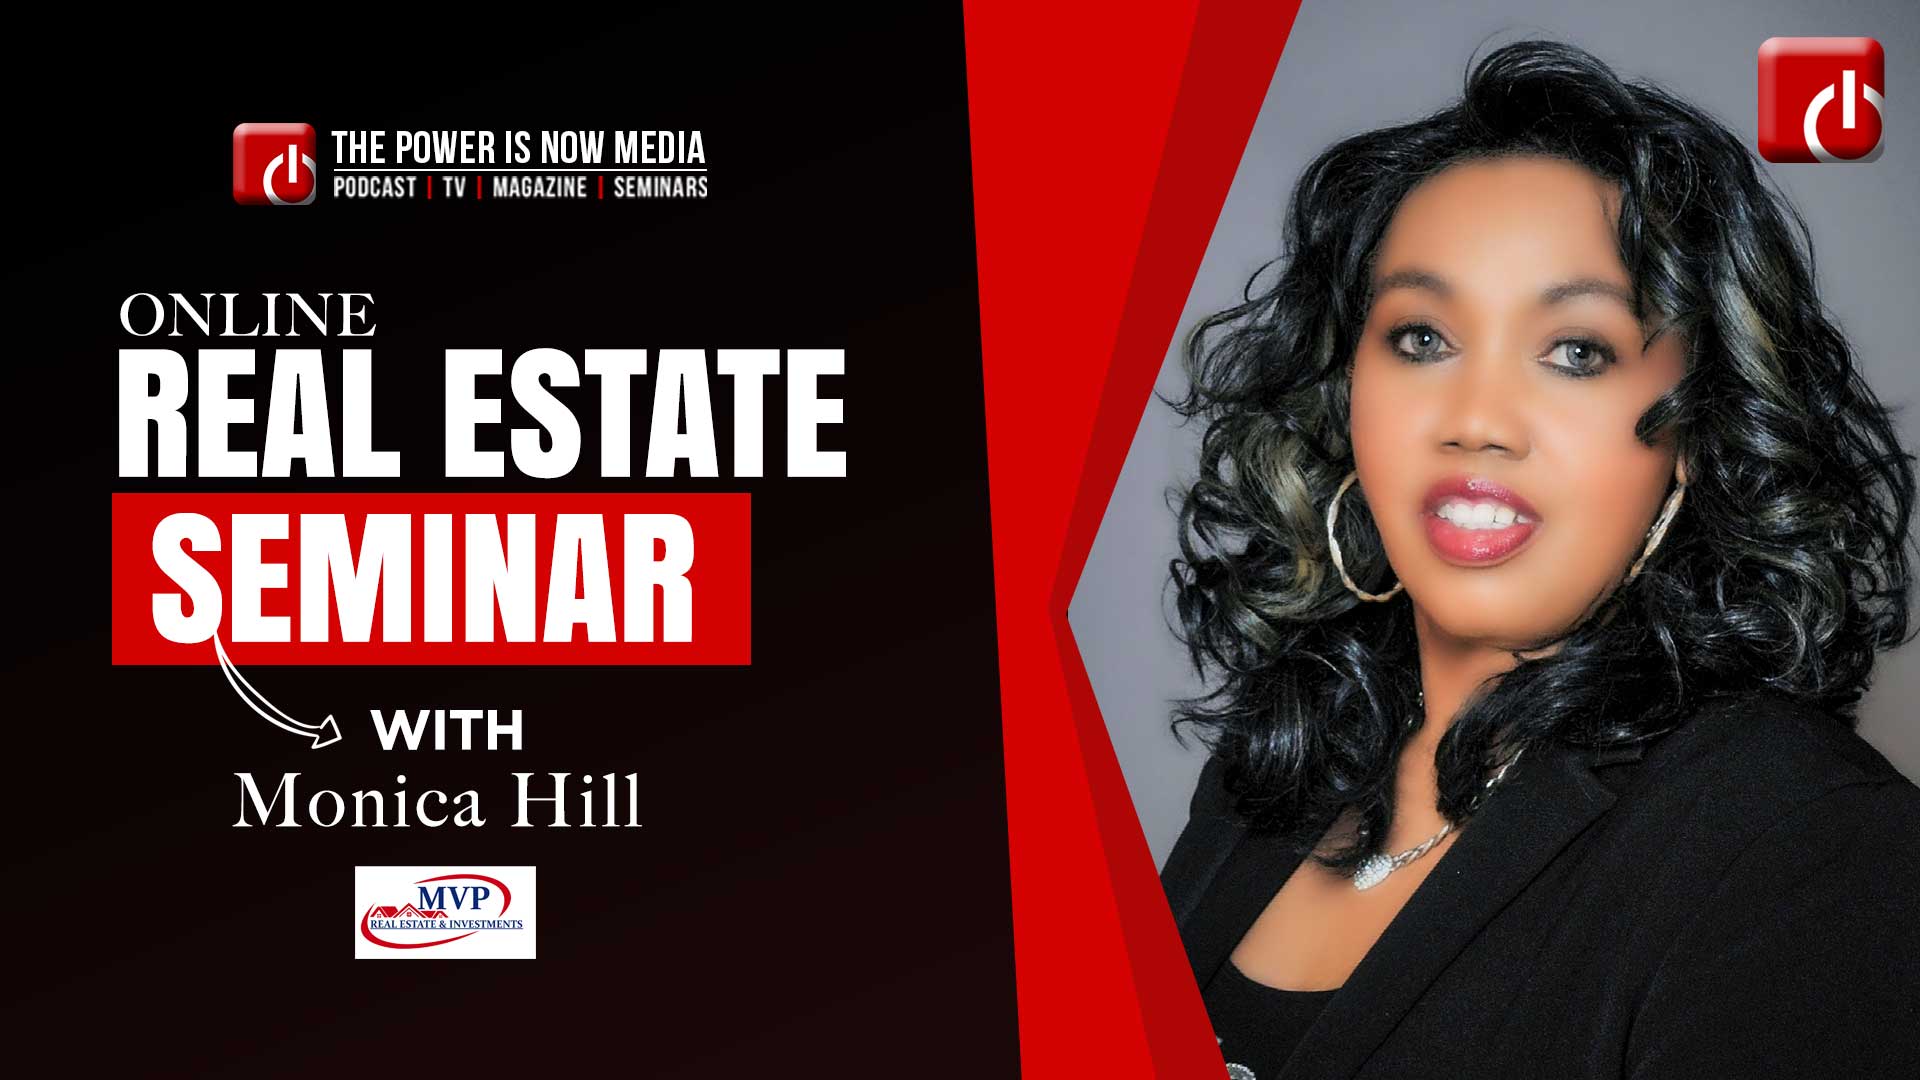 Online Real Estate Seminar with Monica Hill